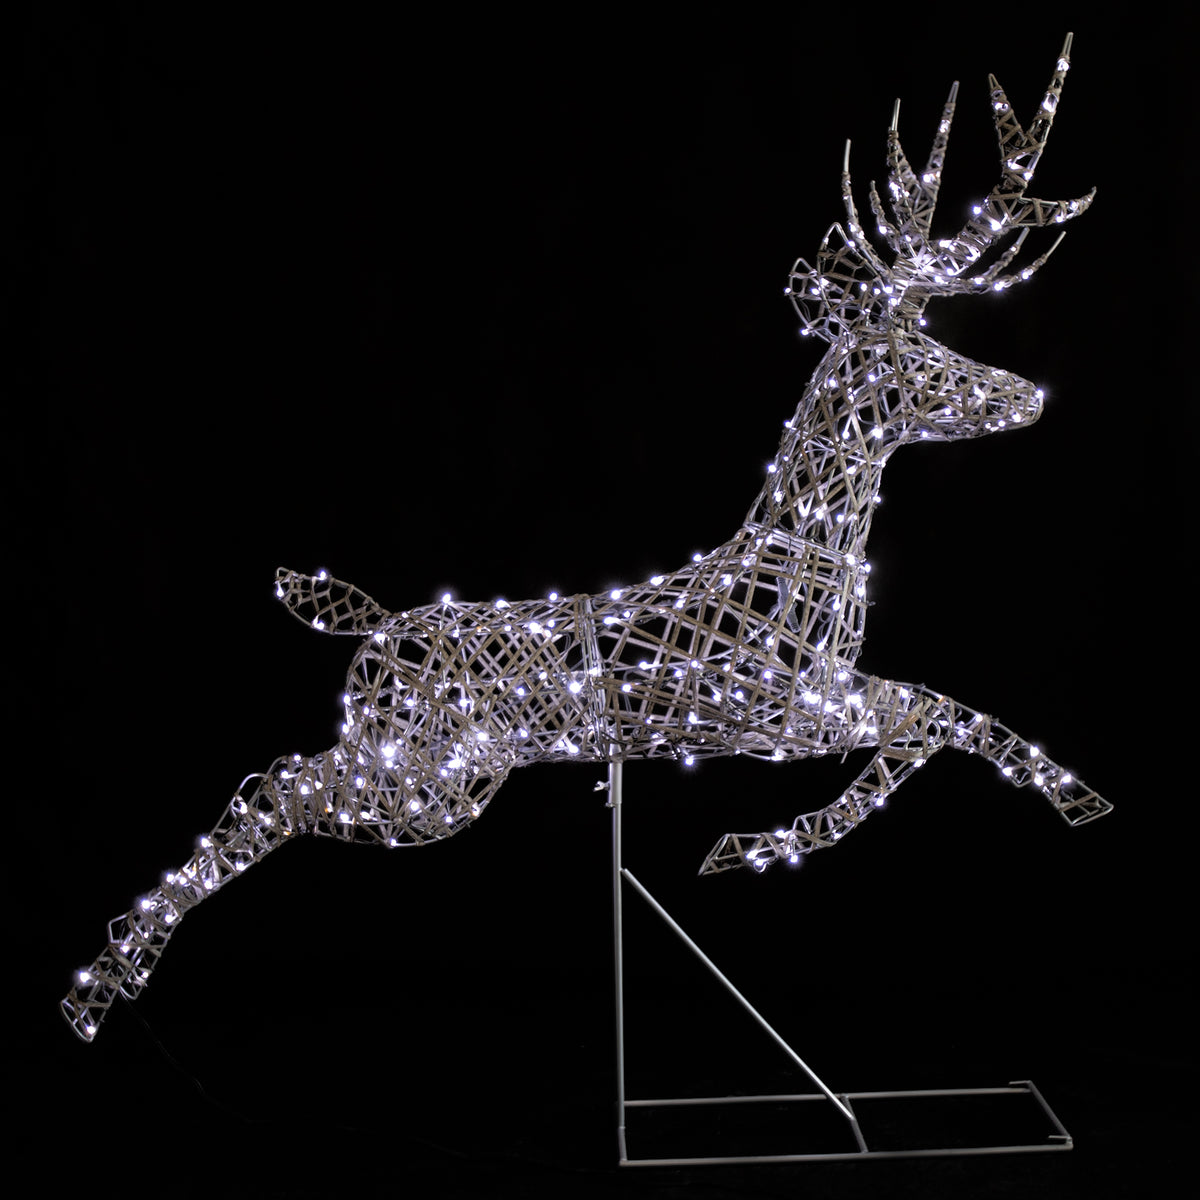 1.5M Grey Wicker Outdoor Light Up Christmas Leaping Stag With 300 White LEDS